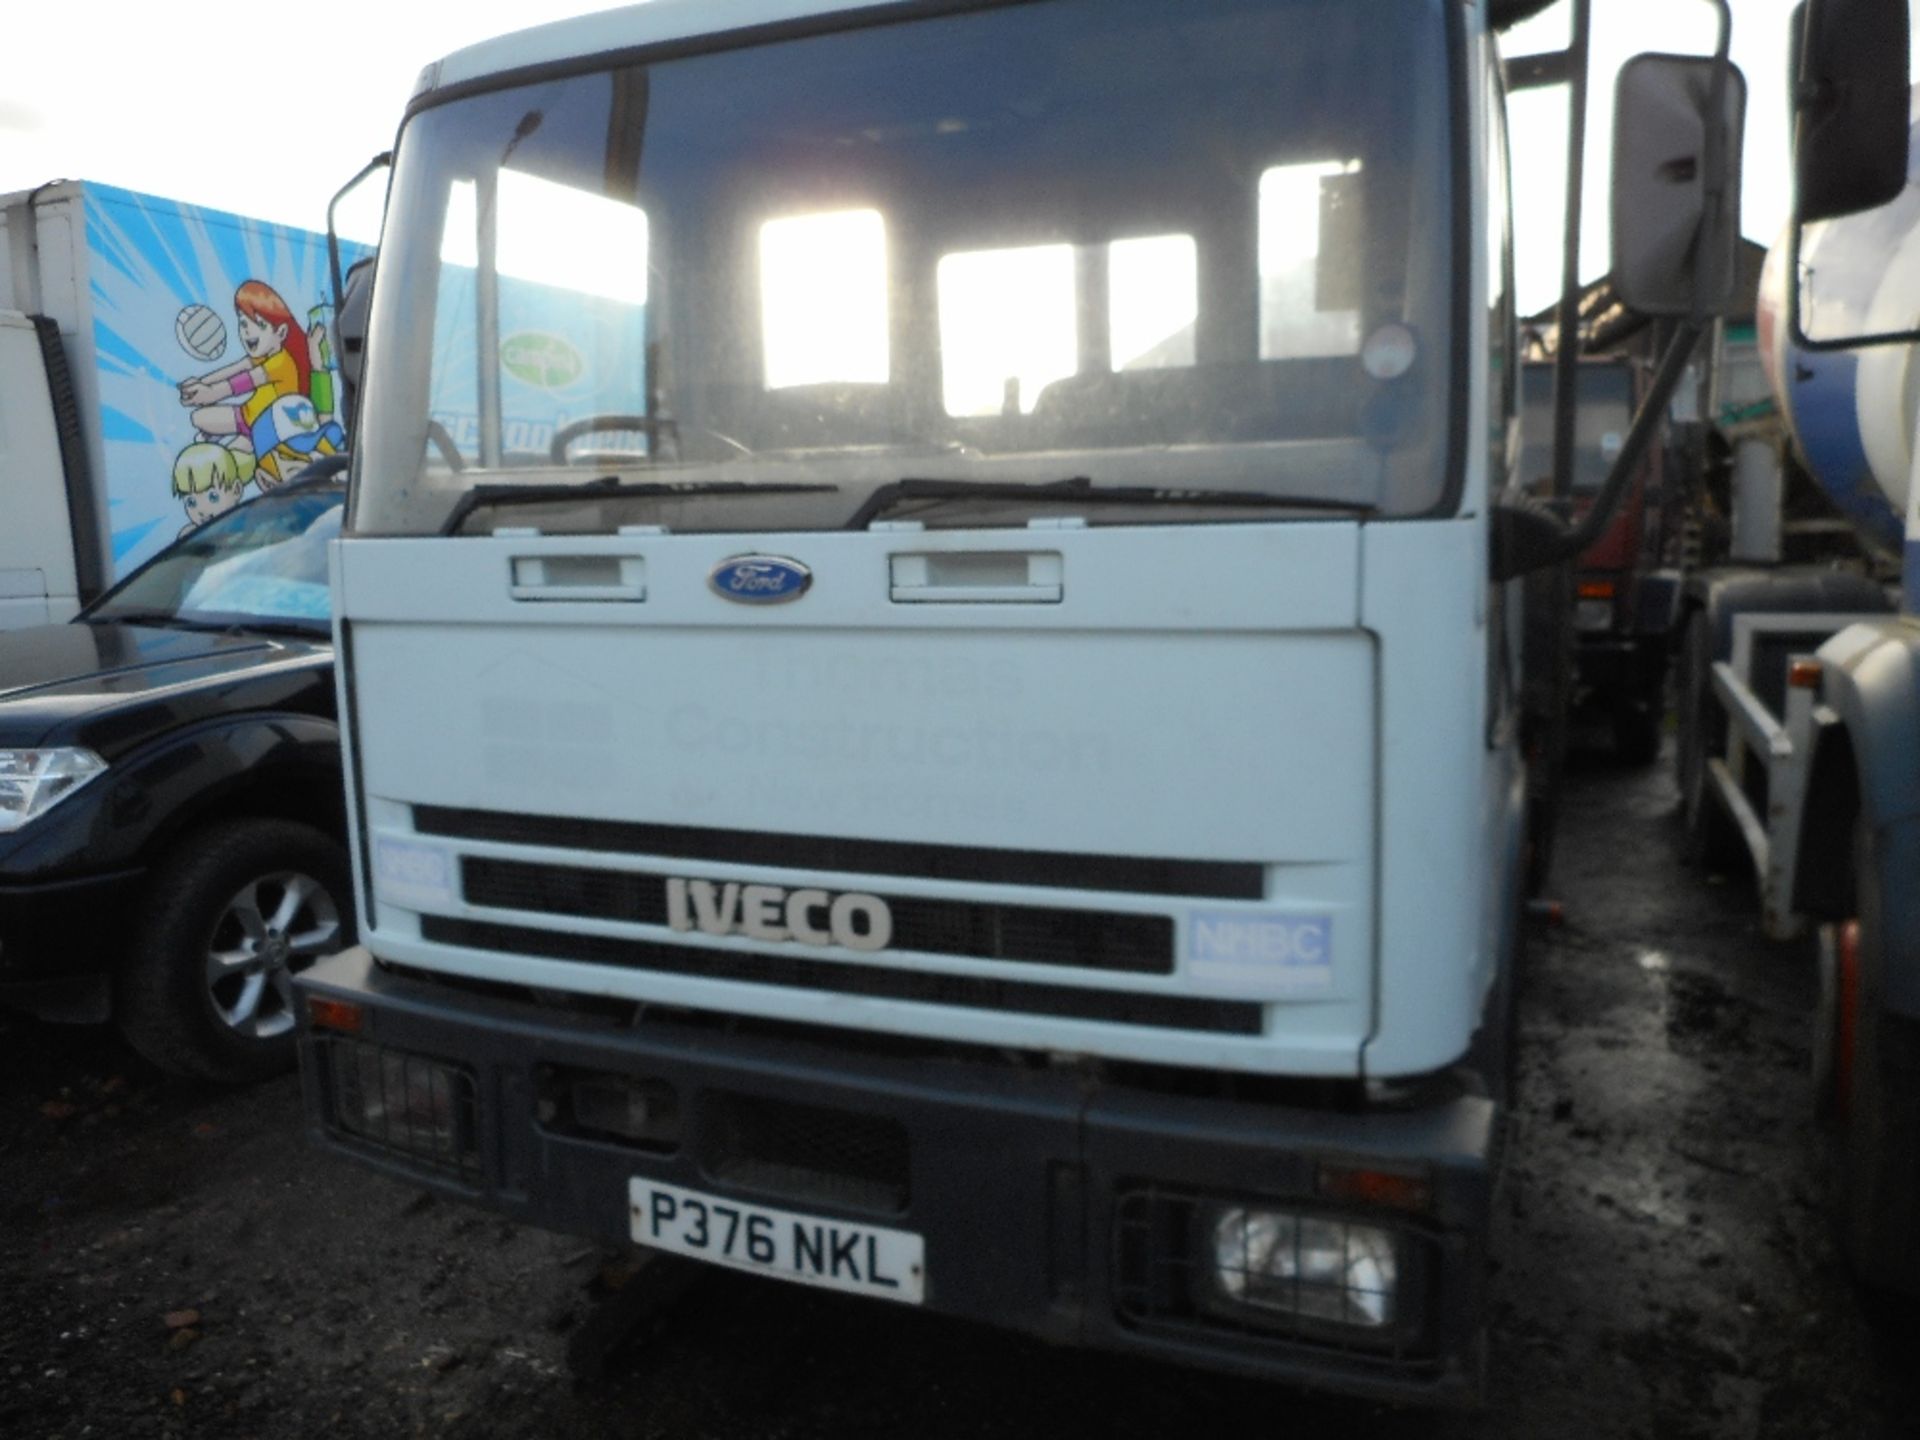 Ford Cargo 75E15 tipper year 1996 approx reg:P376 NKL  Edbro tipping gear fitted. - Image 2 of 8